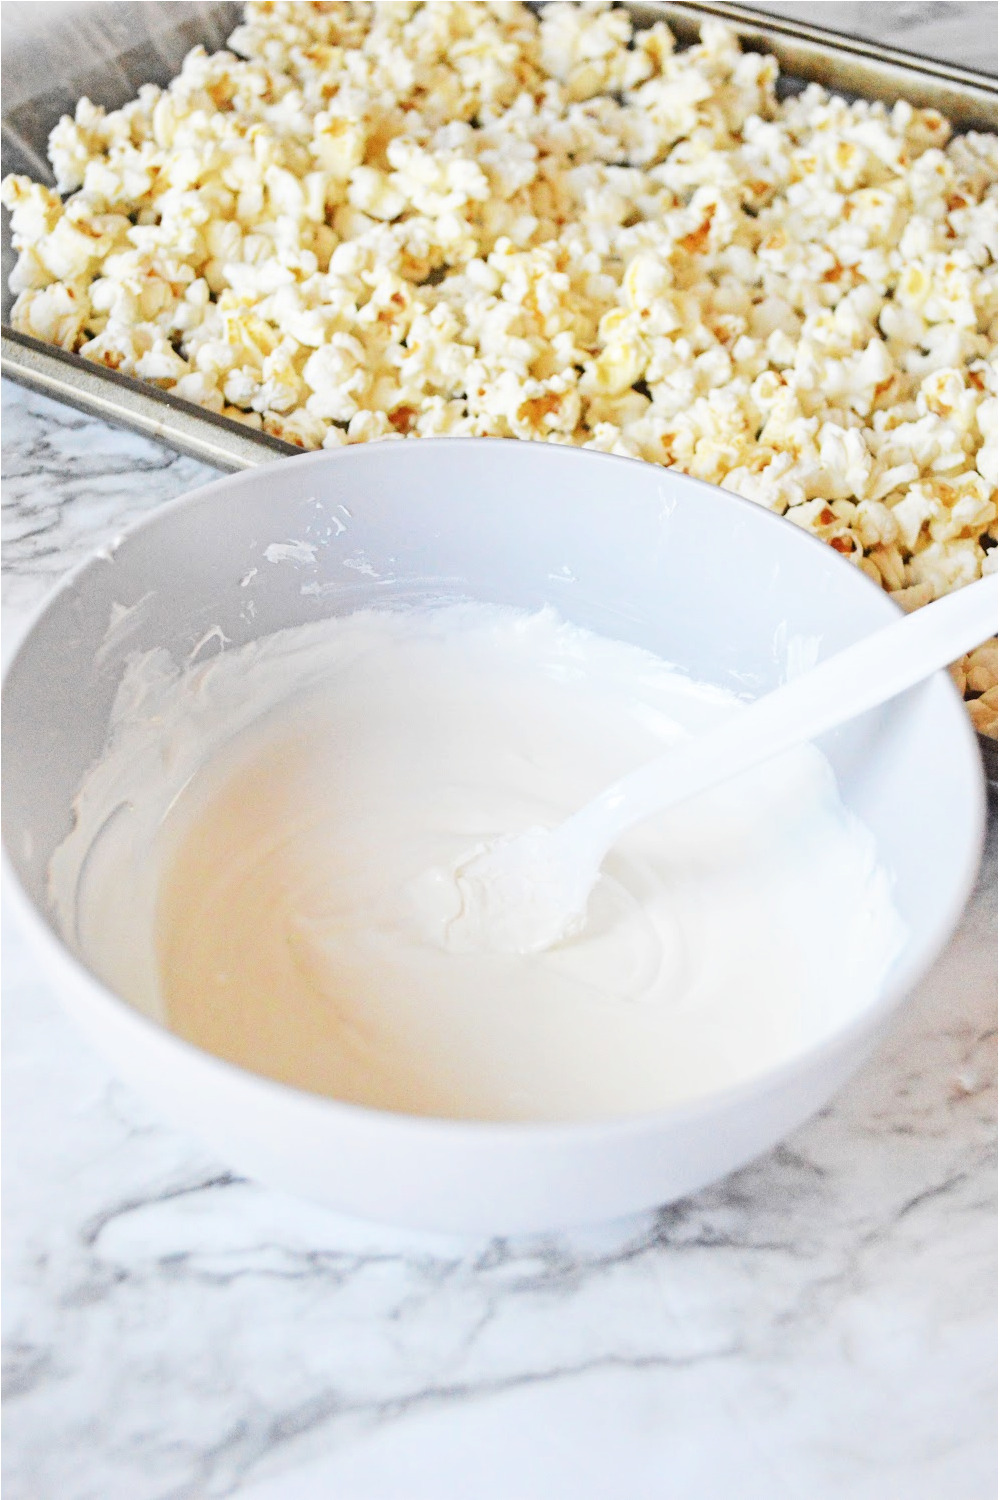 bowl of melted white candy melts ready to drizzle on popcorn with a spoon.